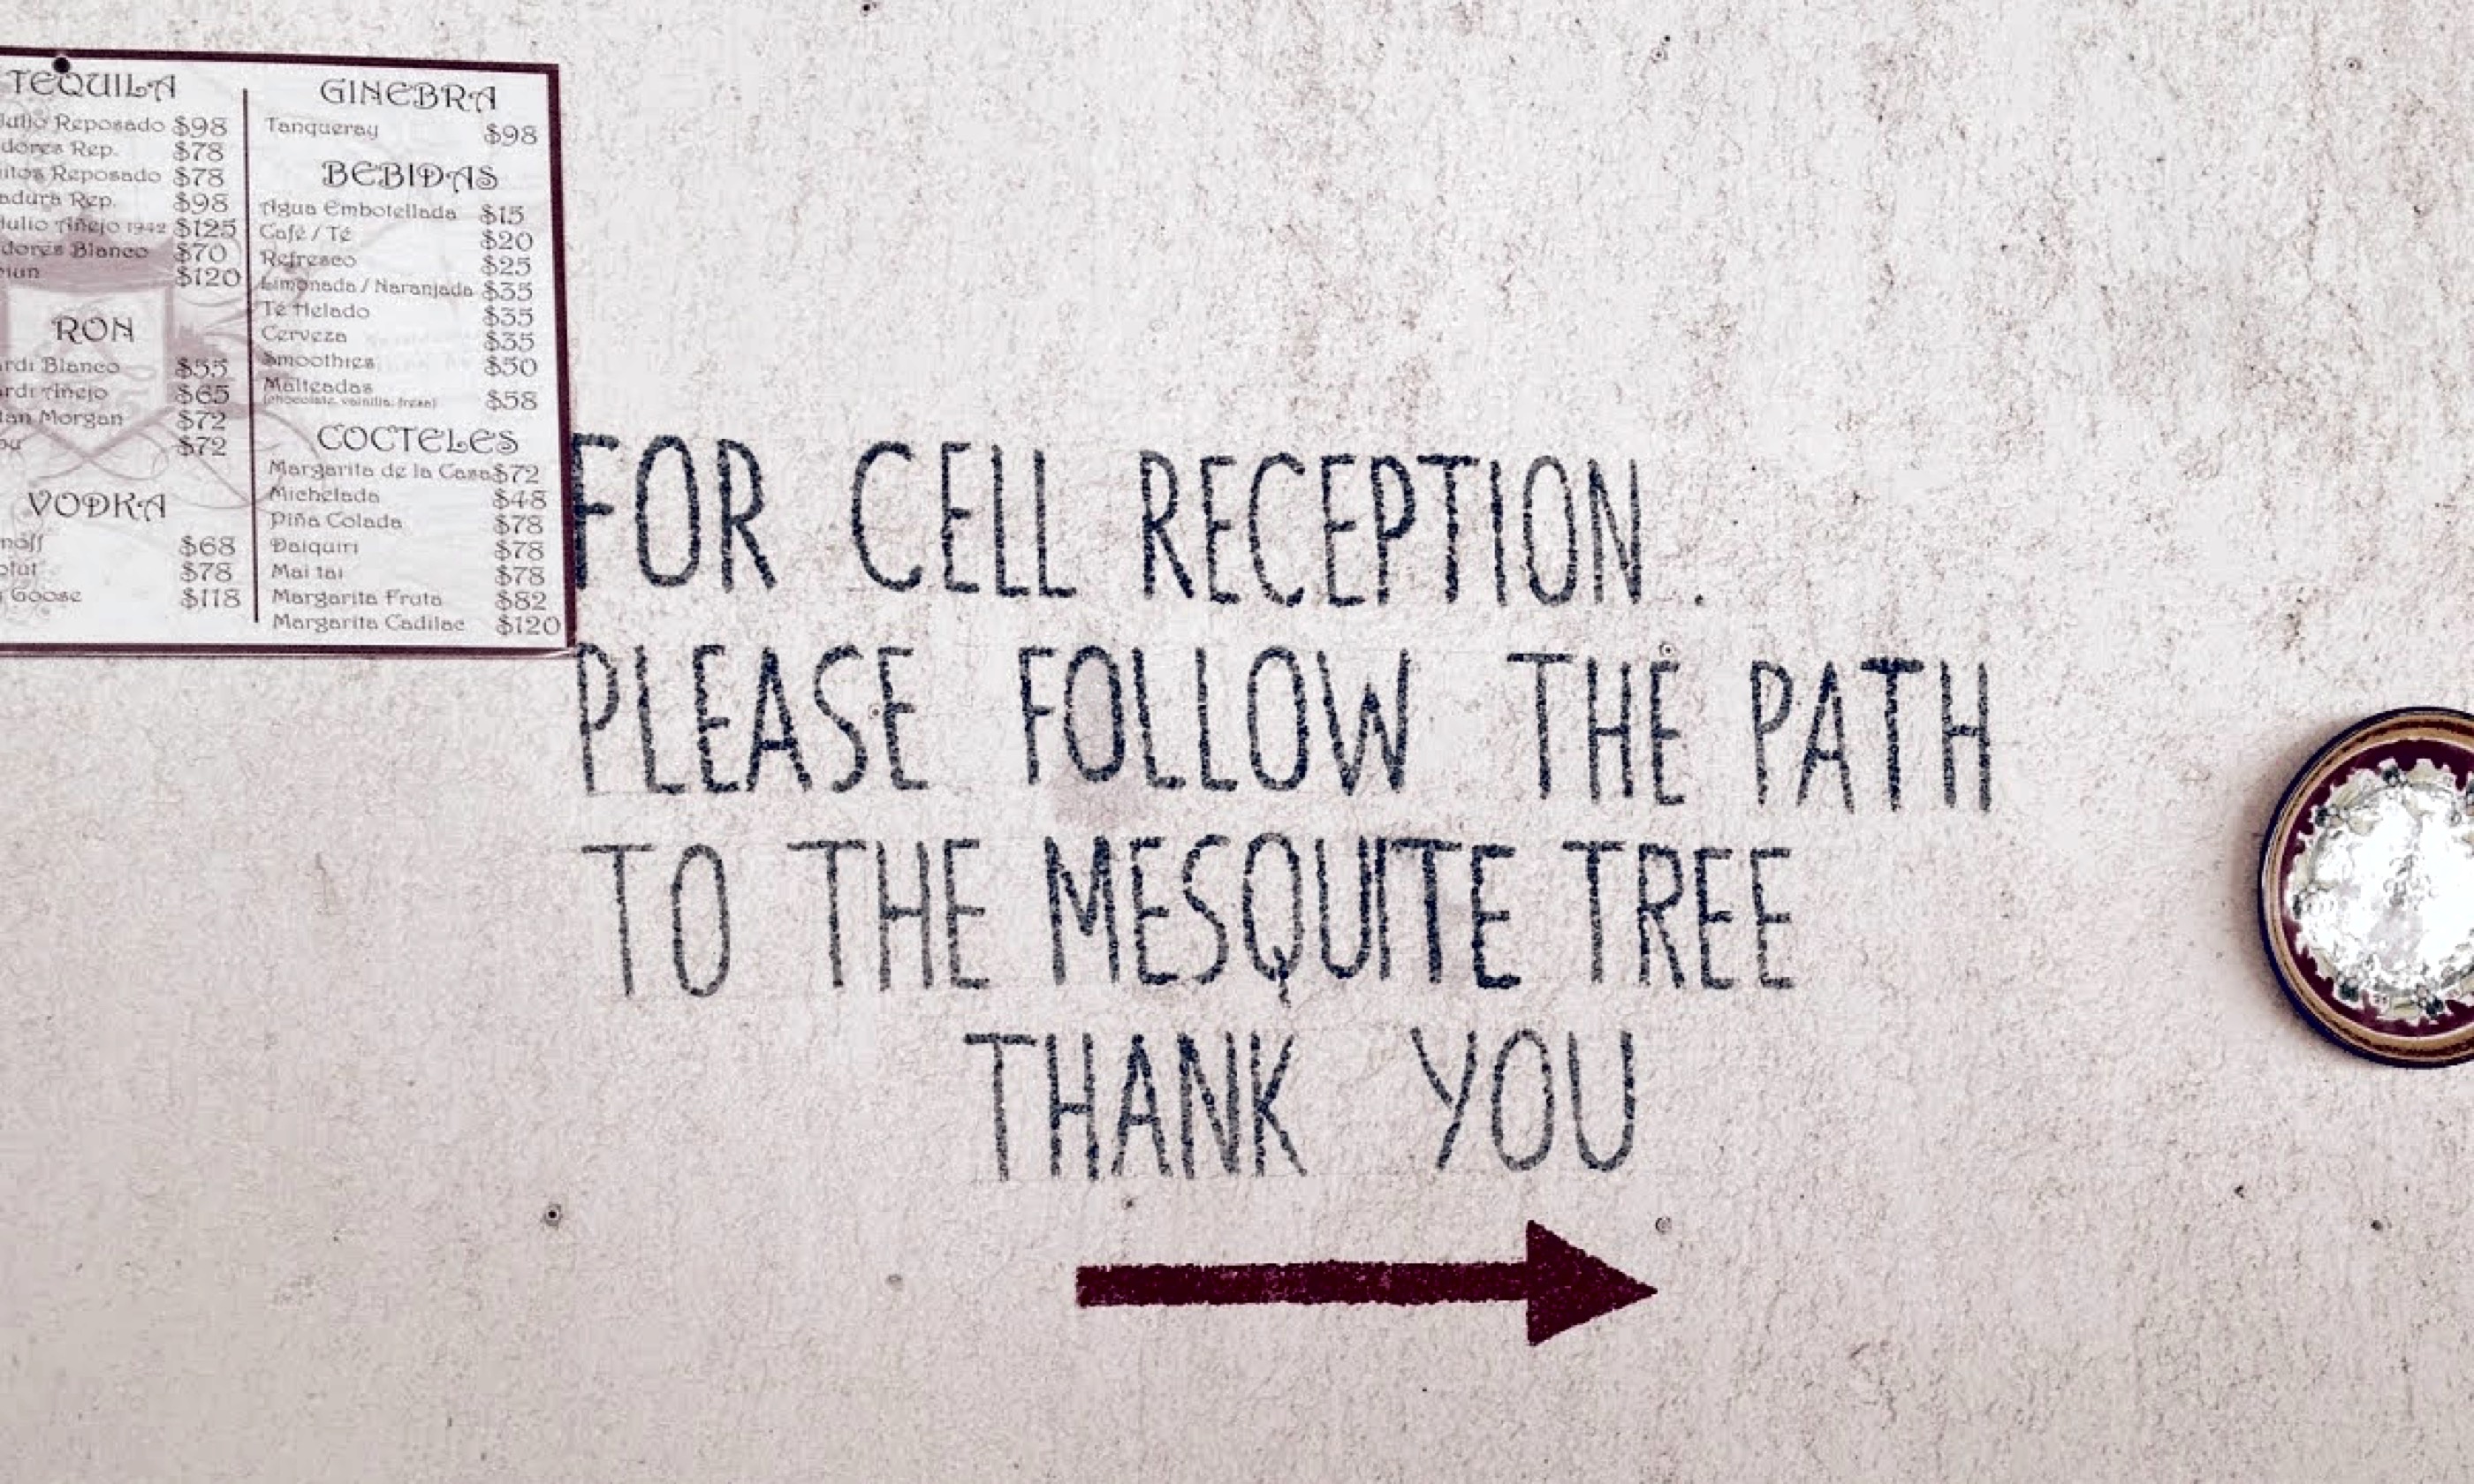 Directions for better cell reception (Aimee Nance)